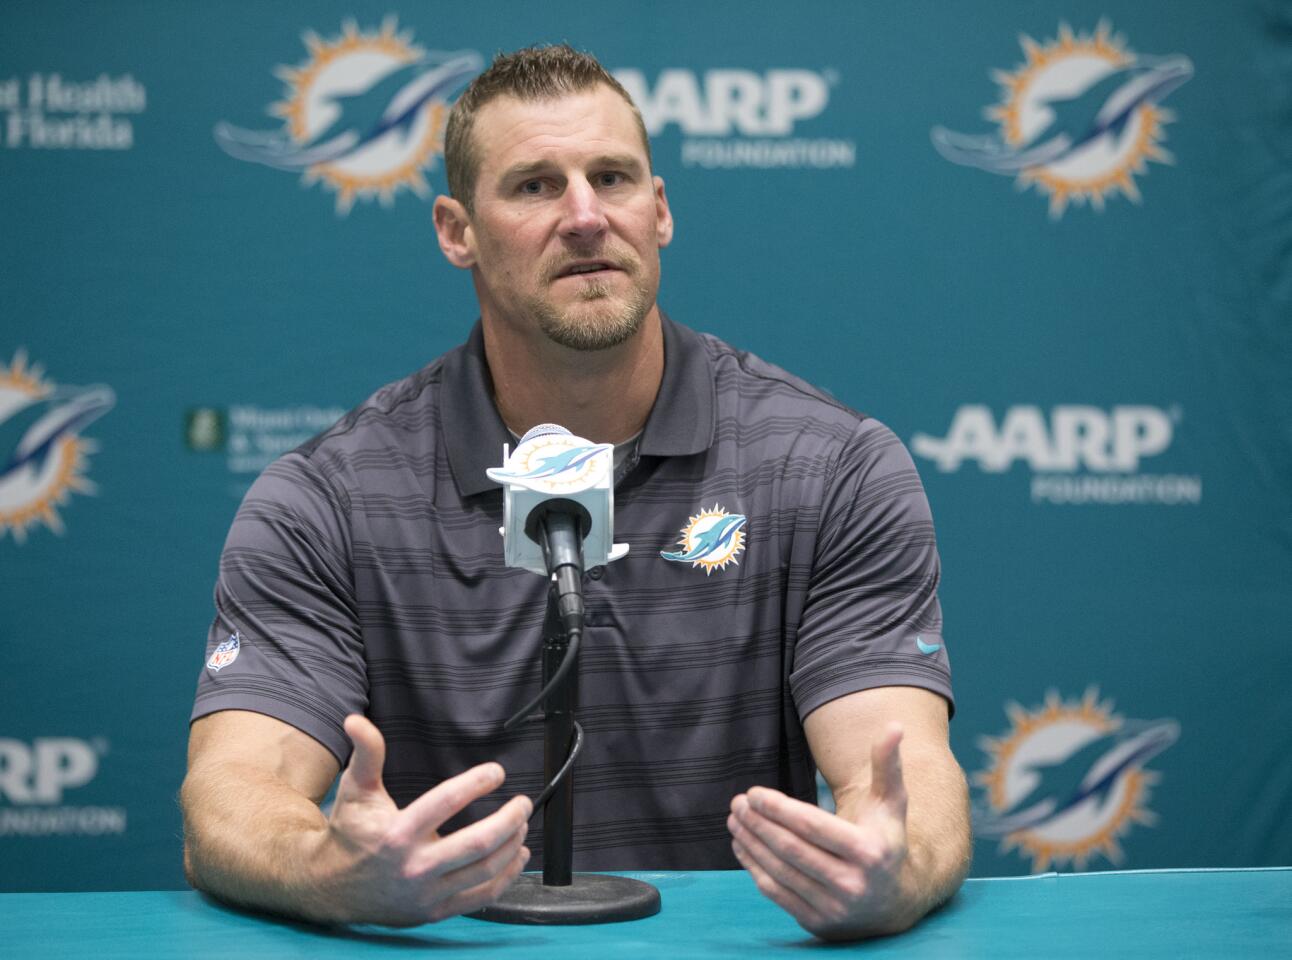 Former Miami Dolphins tight ends coach Dan Campbell speaks during a news conference after being promoted to interim head coach, Monday, Oct. 5, 2015 in Davie, Fla. Joe Philbin has been fired four games into his fourth season as coach of the Dolphins, and one day after a flop on an international stage that helped to seal his fate. (AP Photo/Wilfredo Lee)